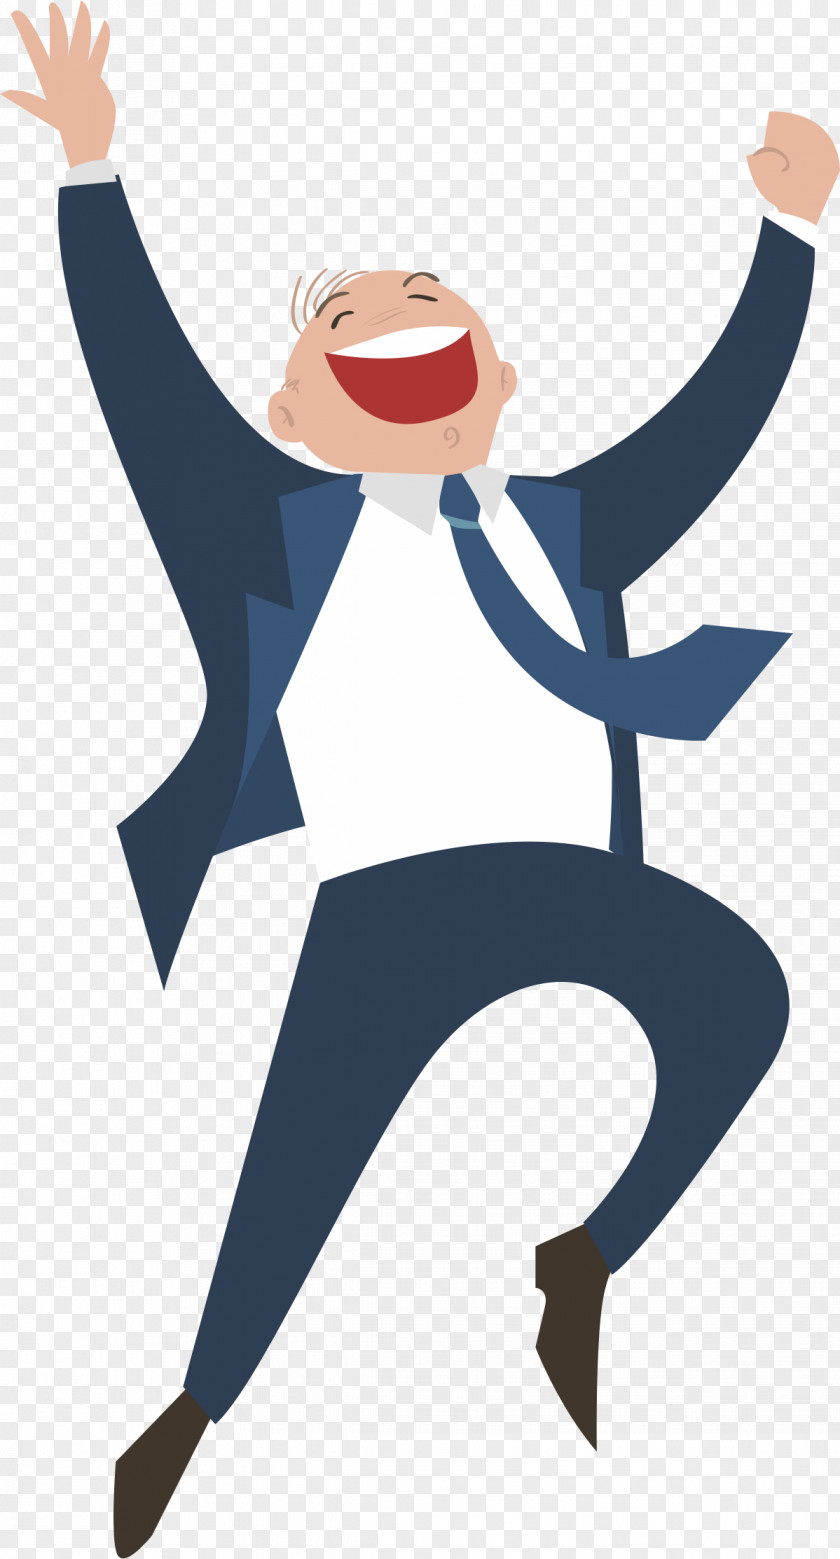 Laughing Man Happiness Illustration PNG